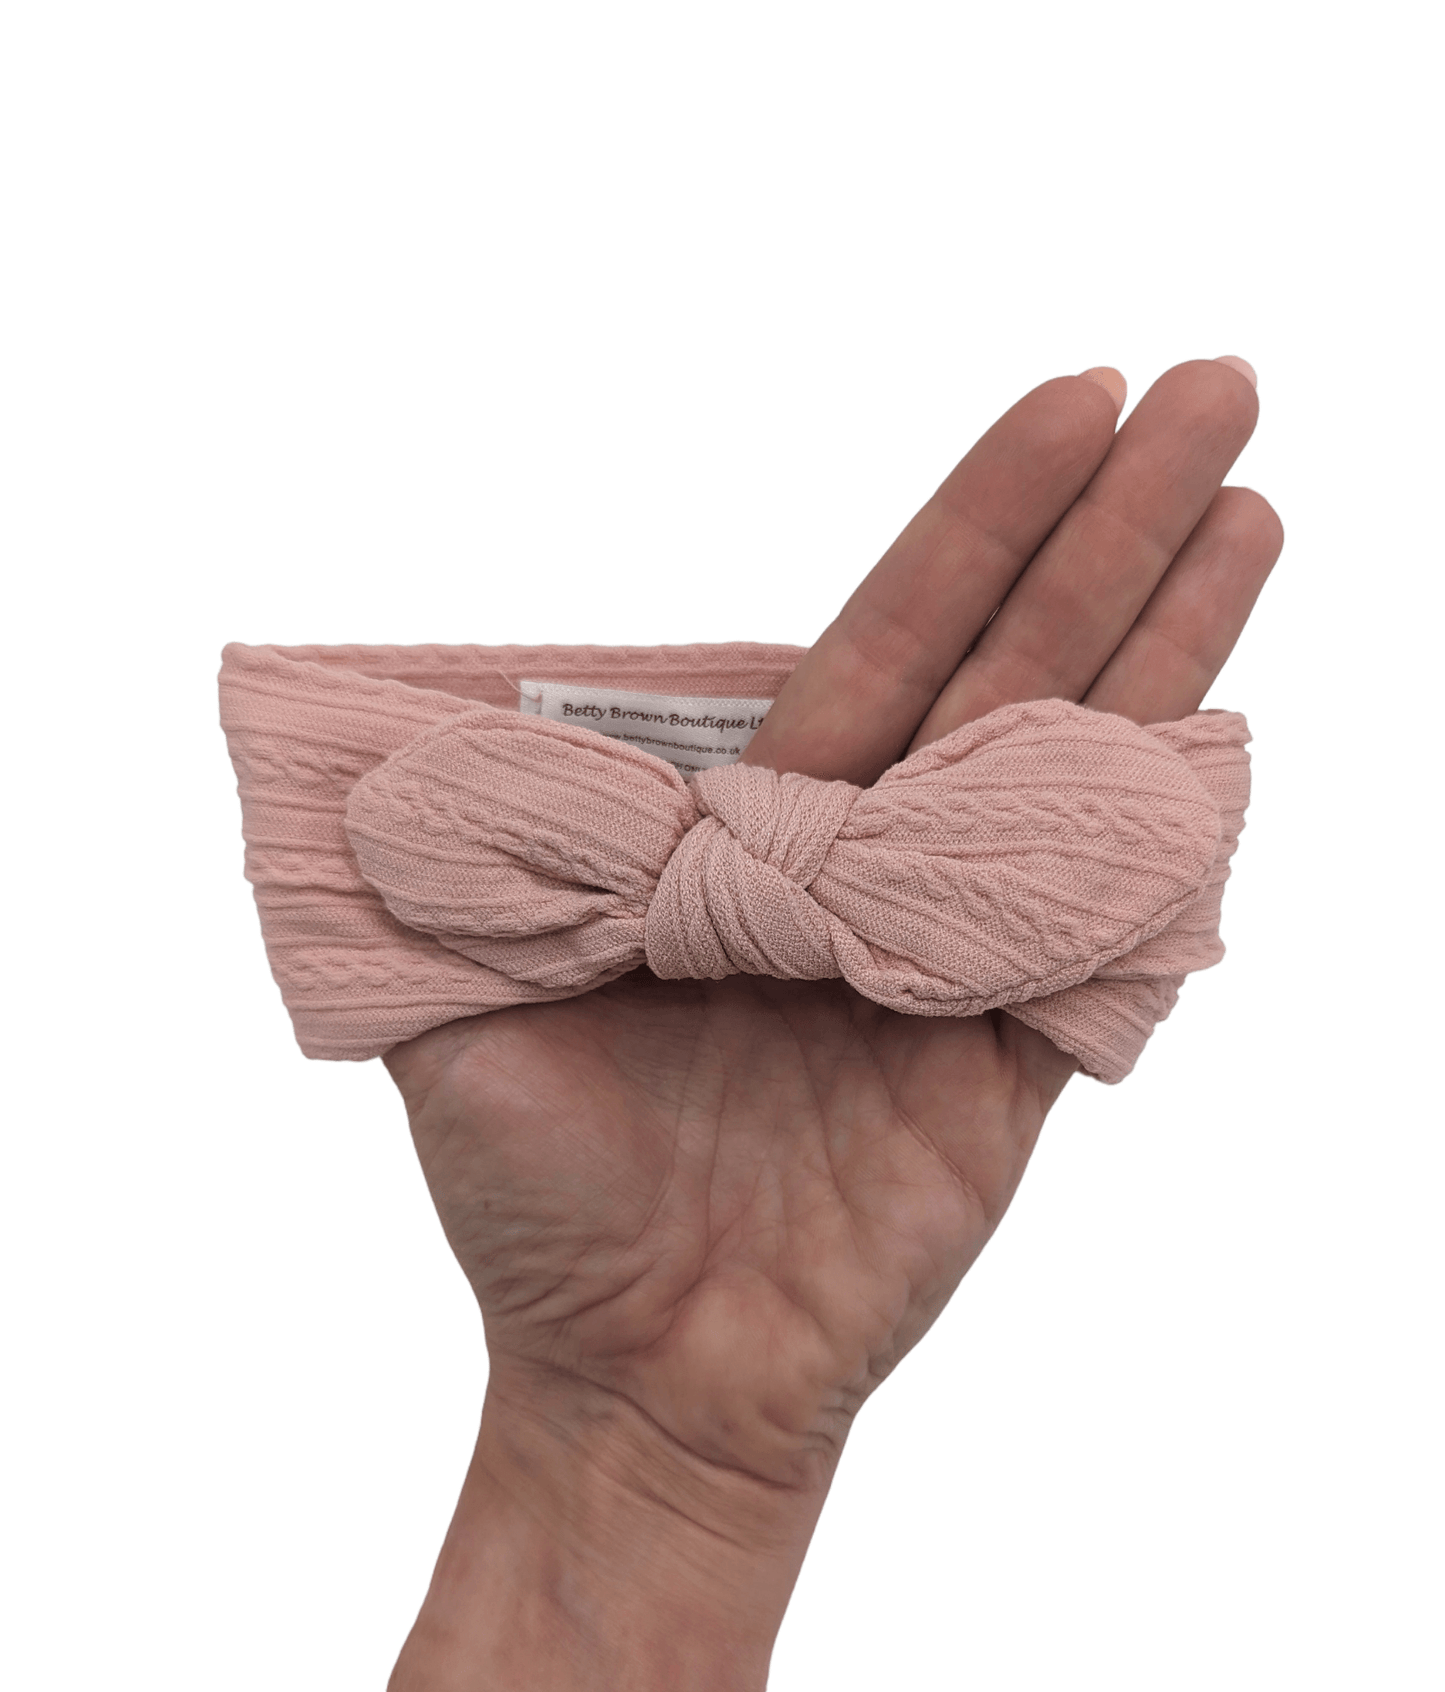 Lighter Dusty Pink Cable Knit Bunny Ears Headwrap - Betty Brown Boutique Ltd